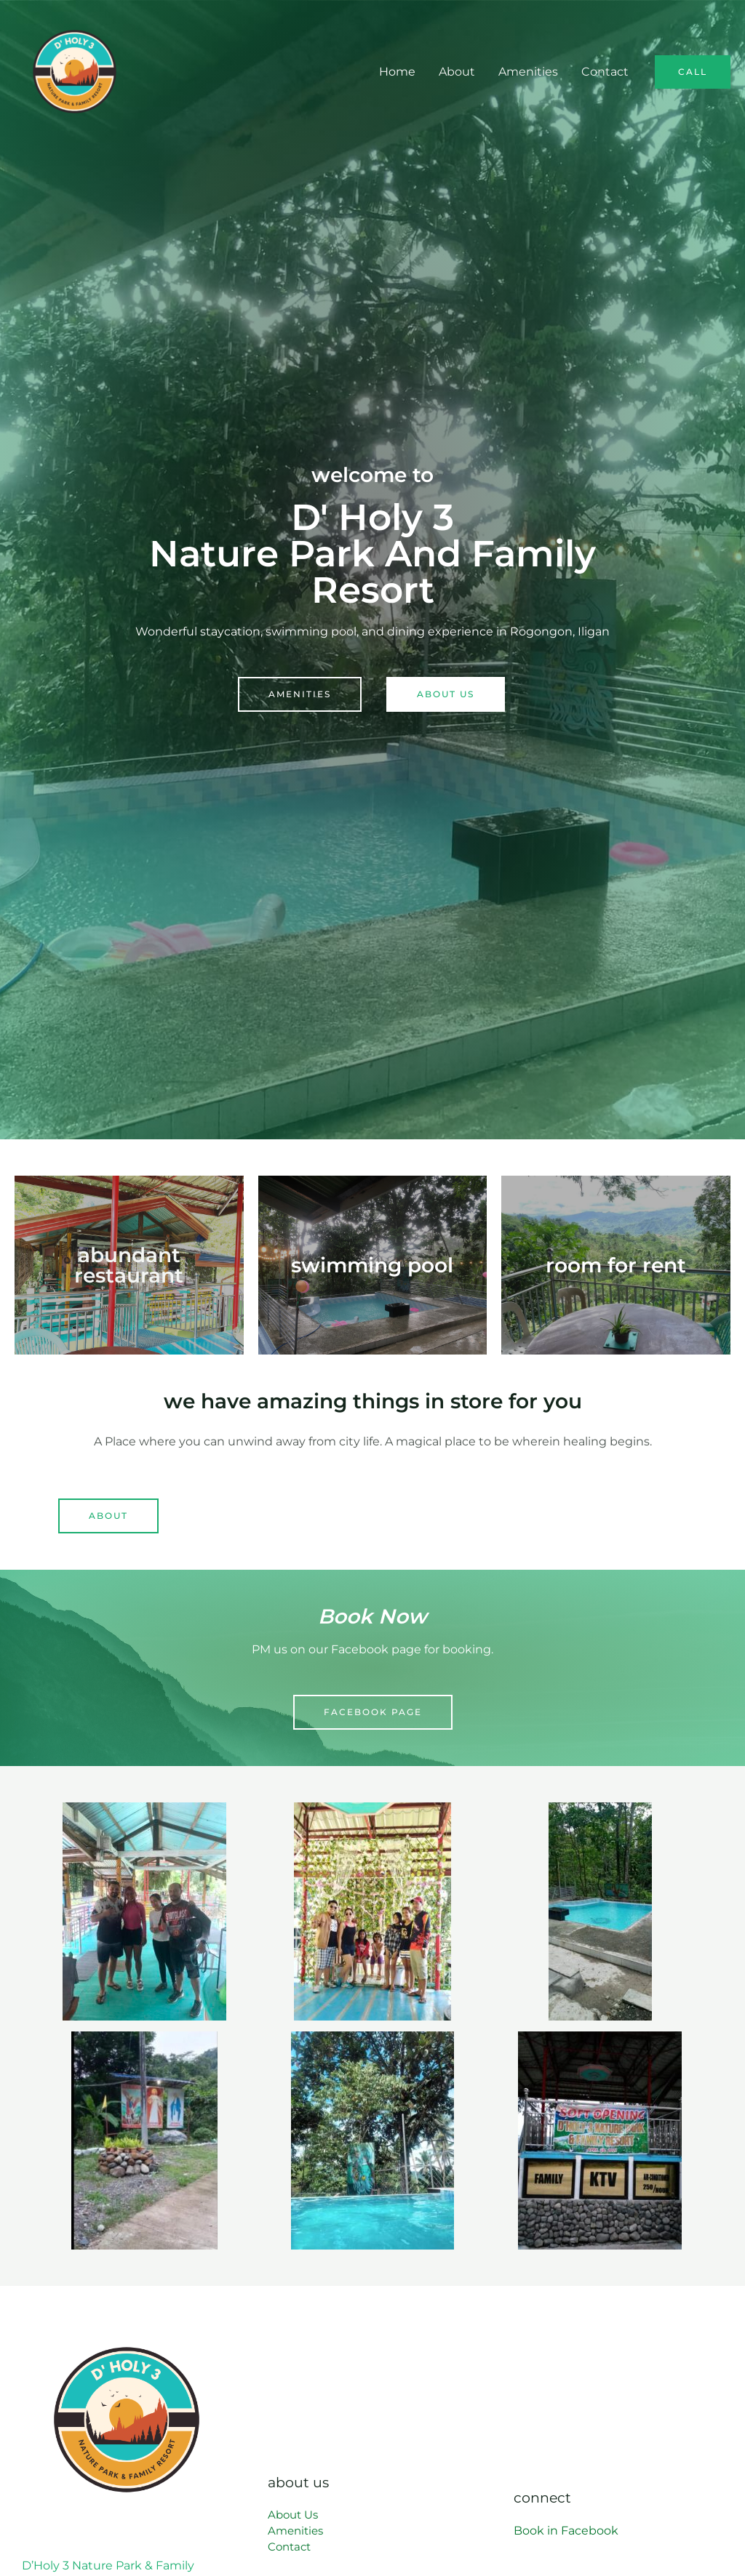 New Website for D’Holy 3 Nature Park and Family Resort Launches